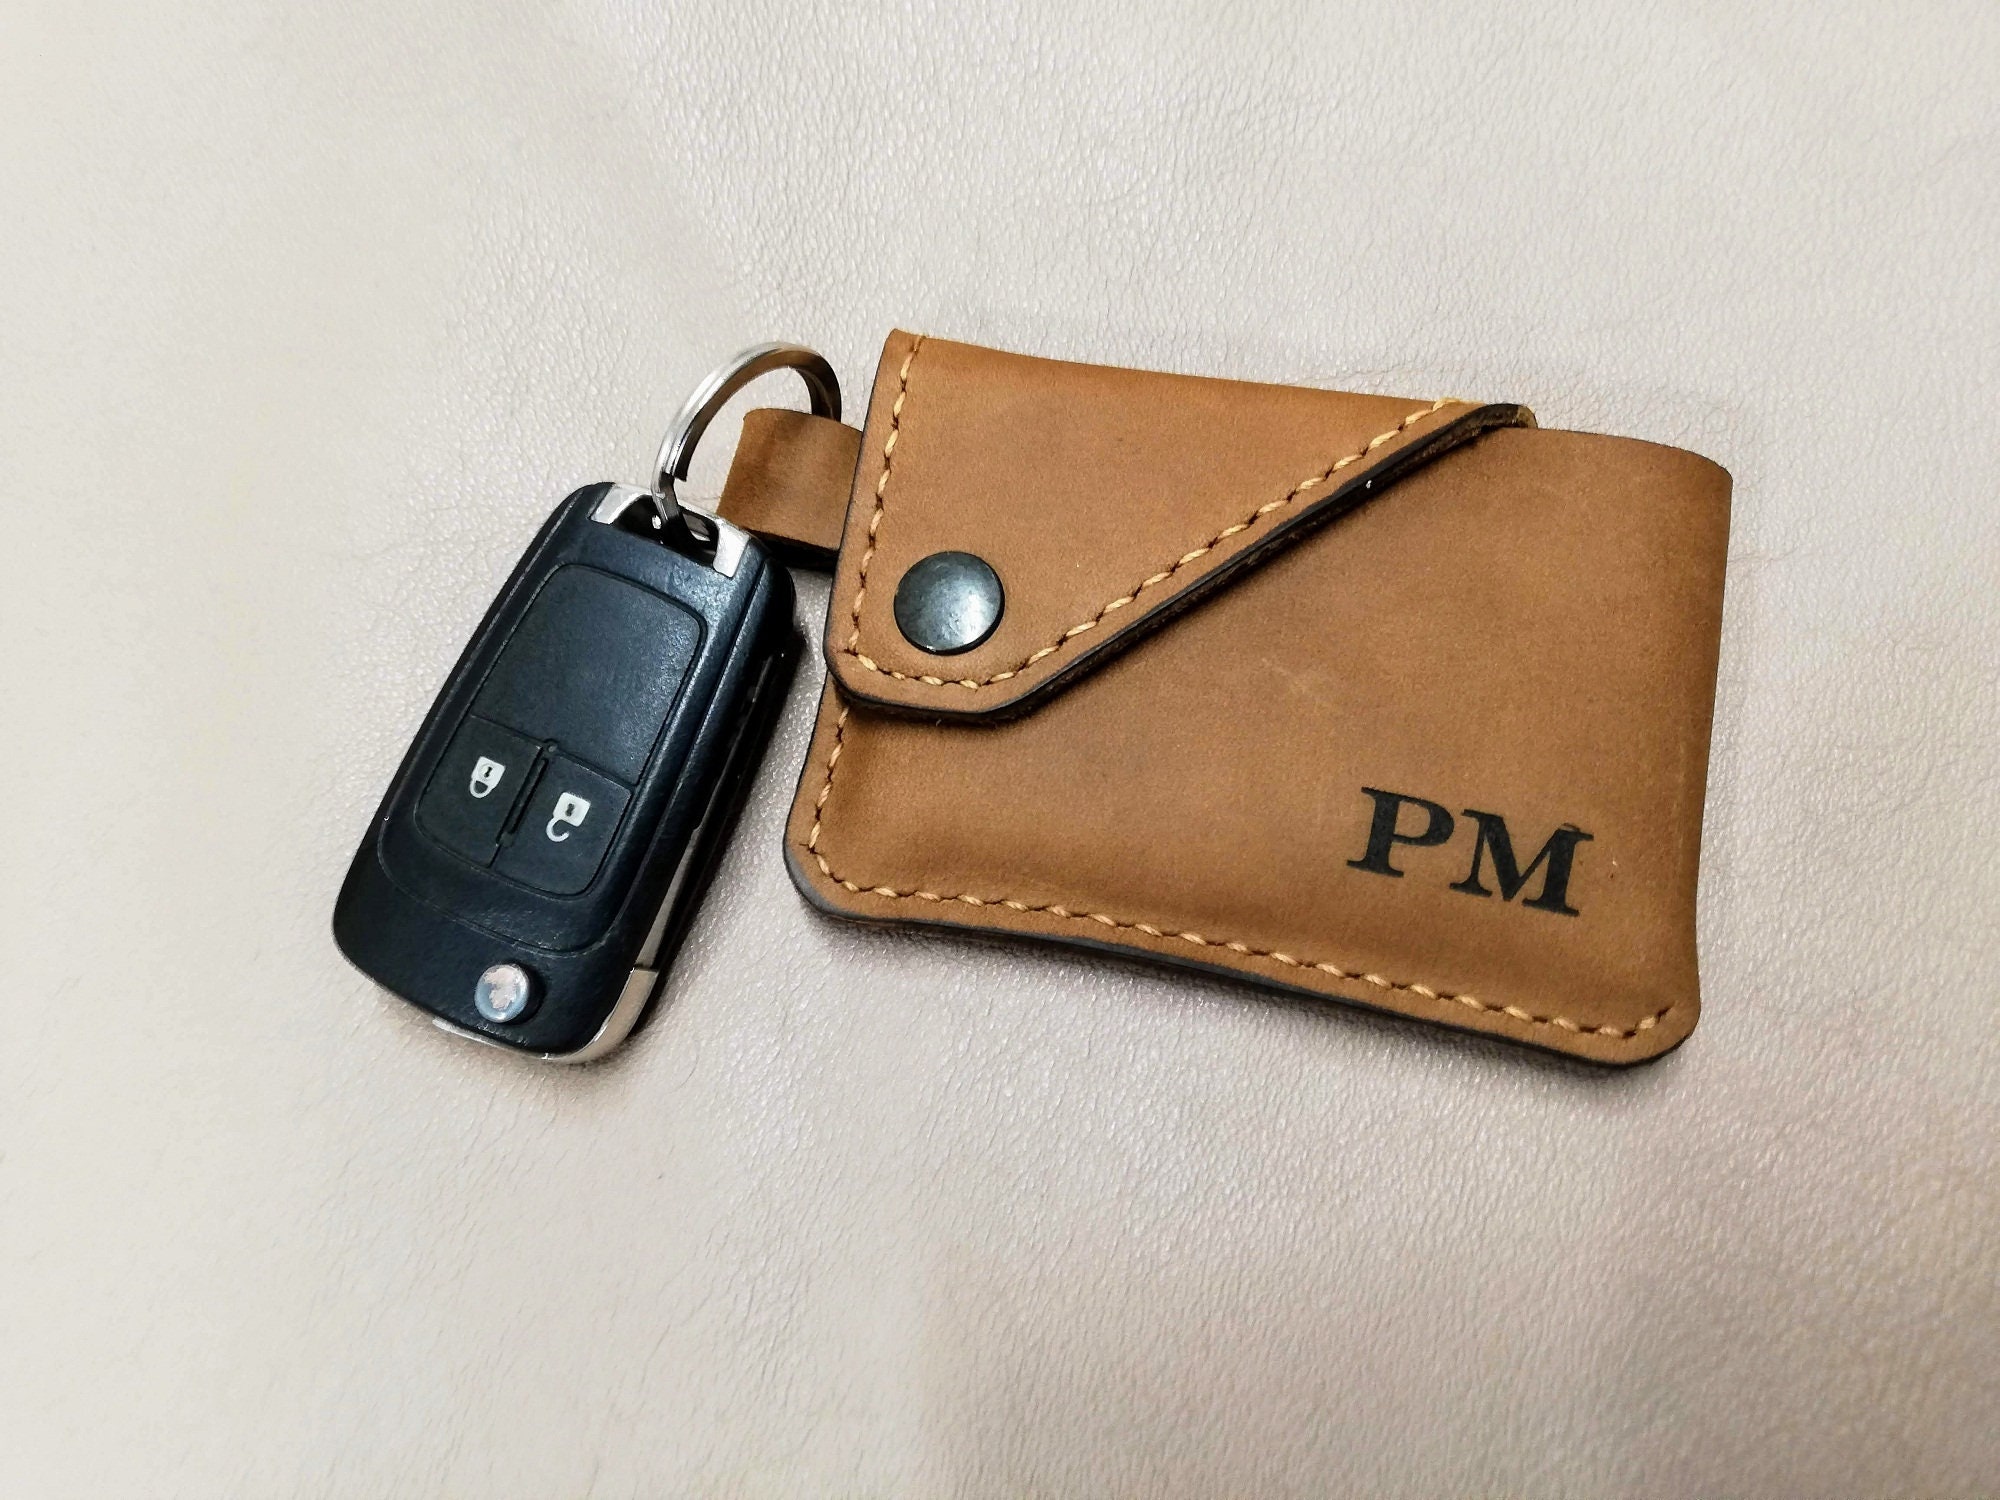 Wallet keychain ♥️  Girly car accessories, Cute car accessories